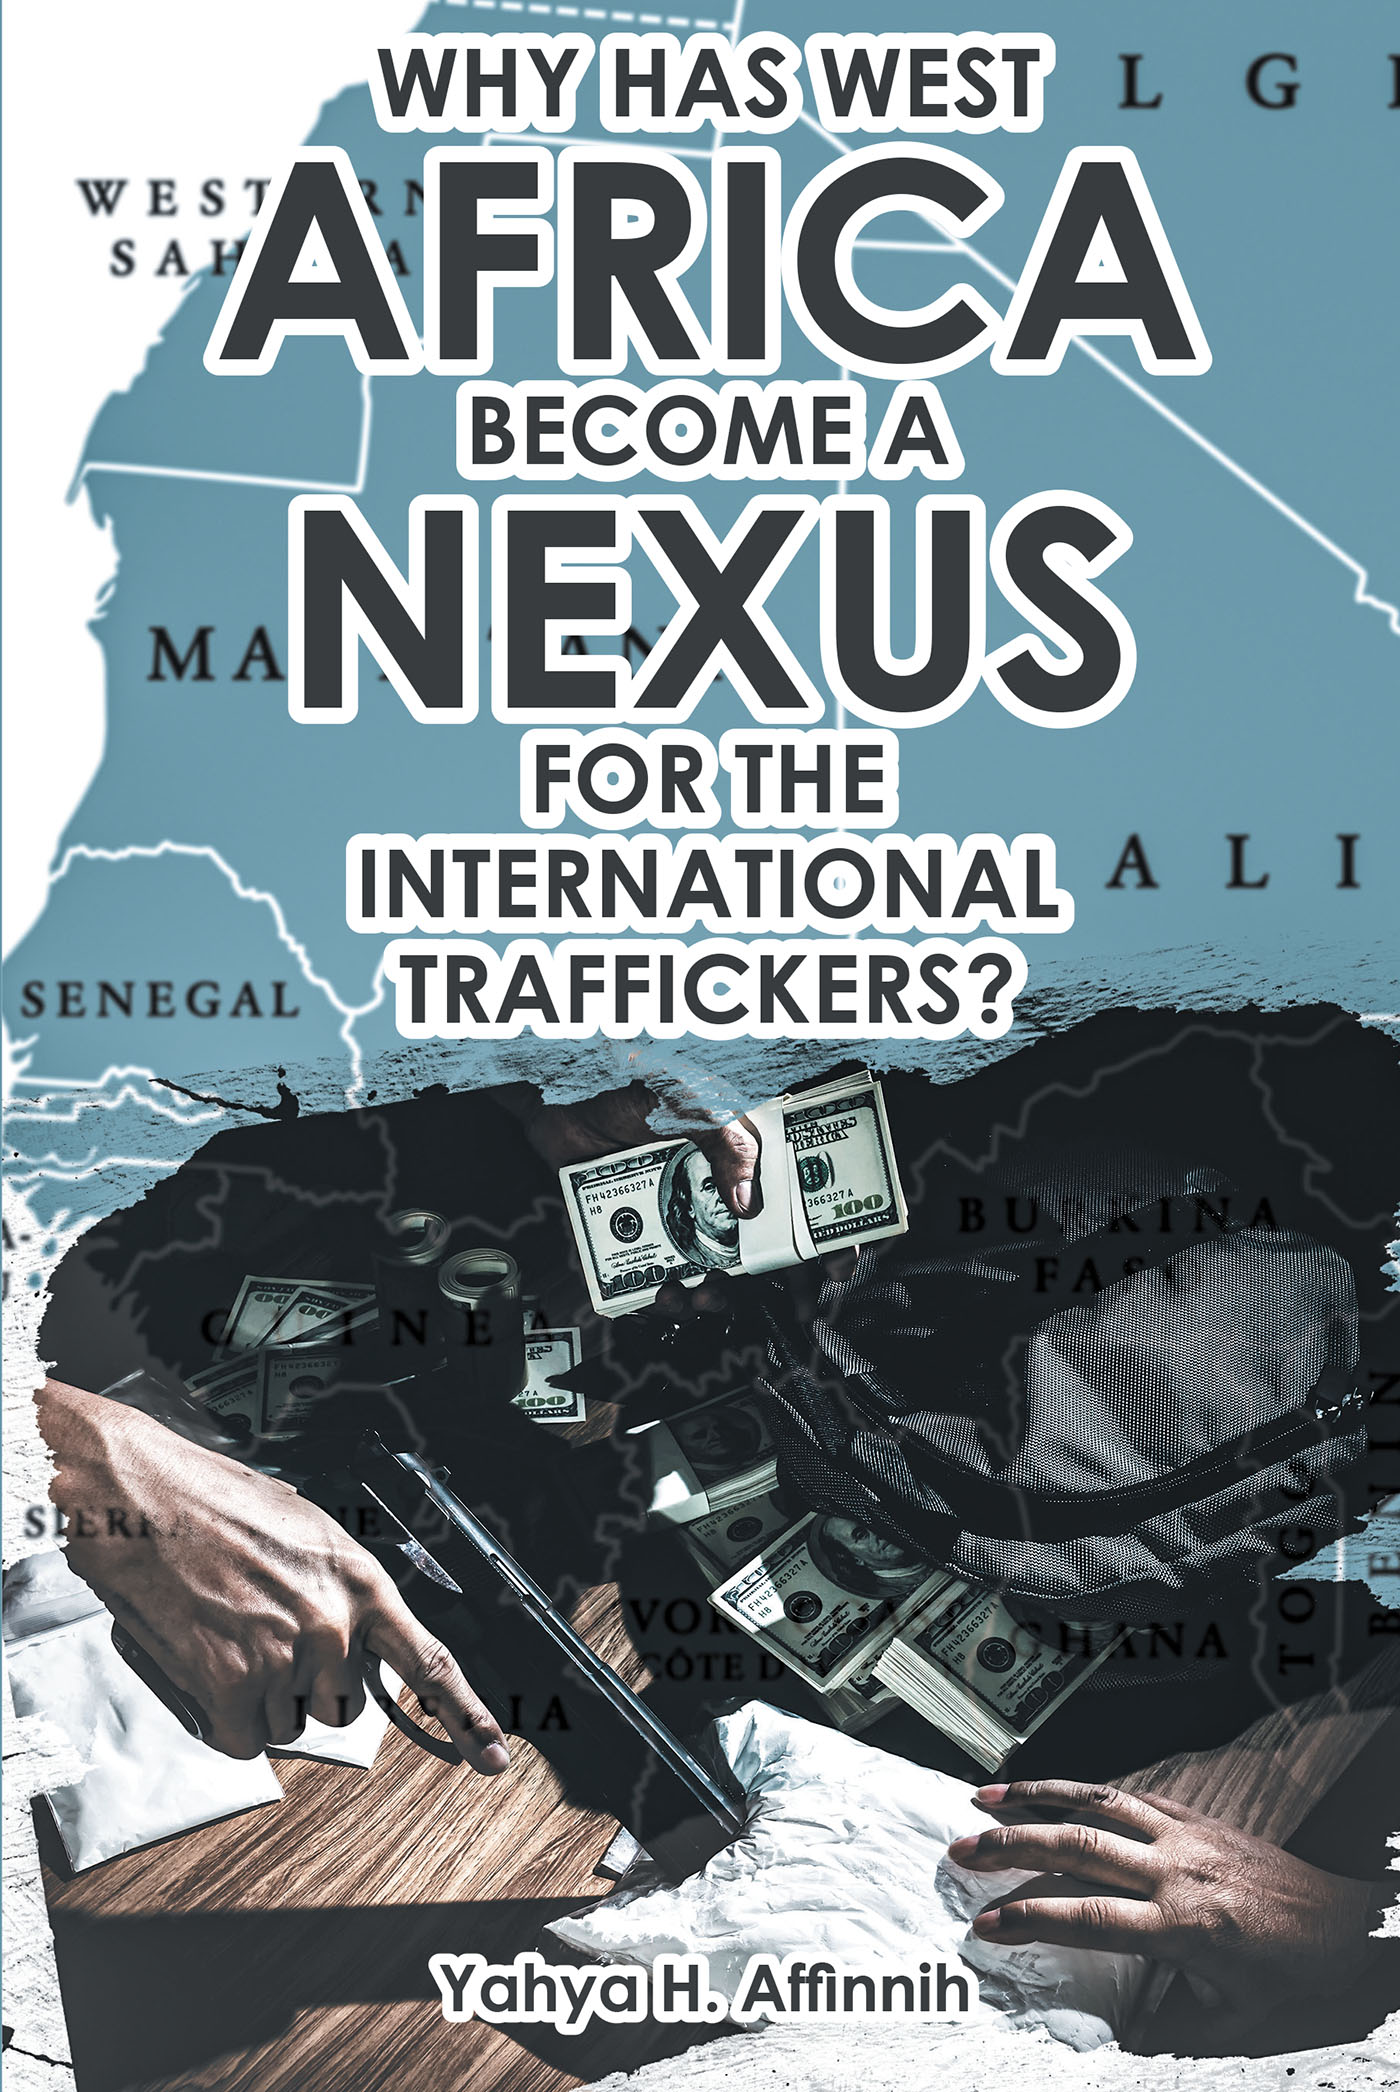 Author Yahya H. Affinnih’s New Book, "Why Has West Africa Become a Nexus for the International Traffickers," Seeks to Explain the Issues Affecting West Africa Today